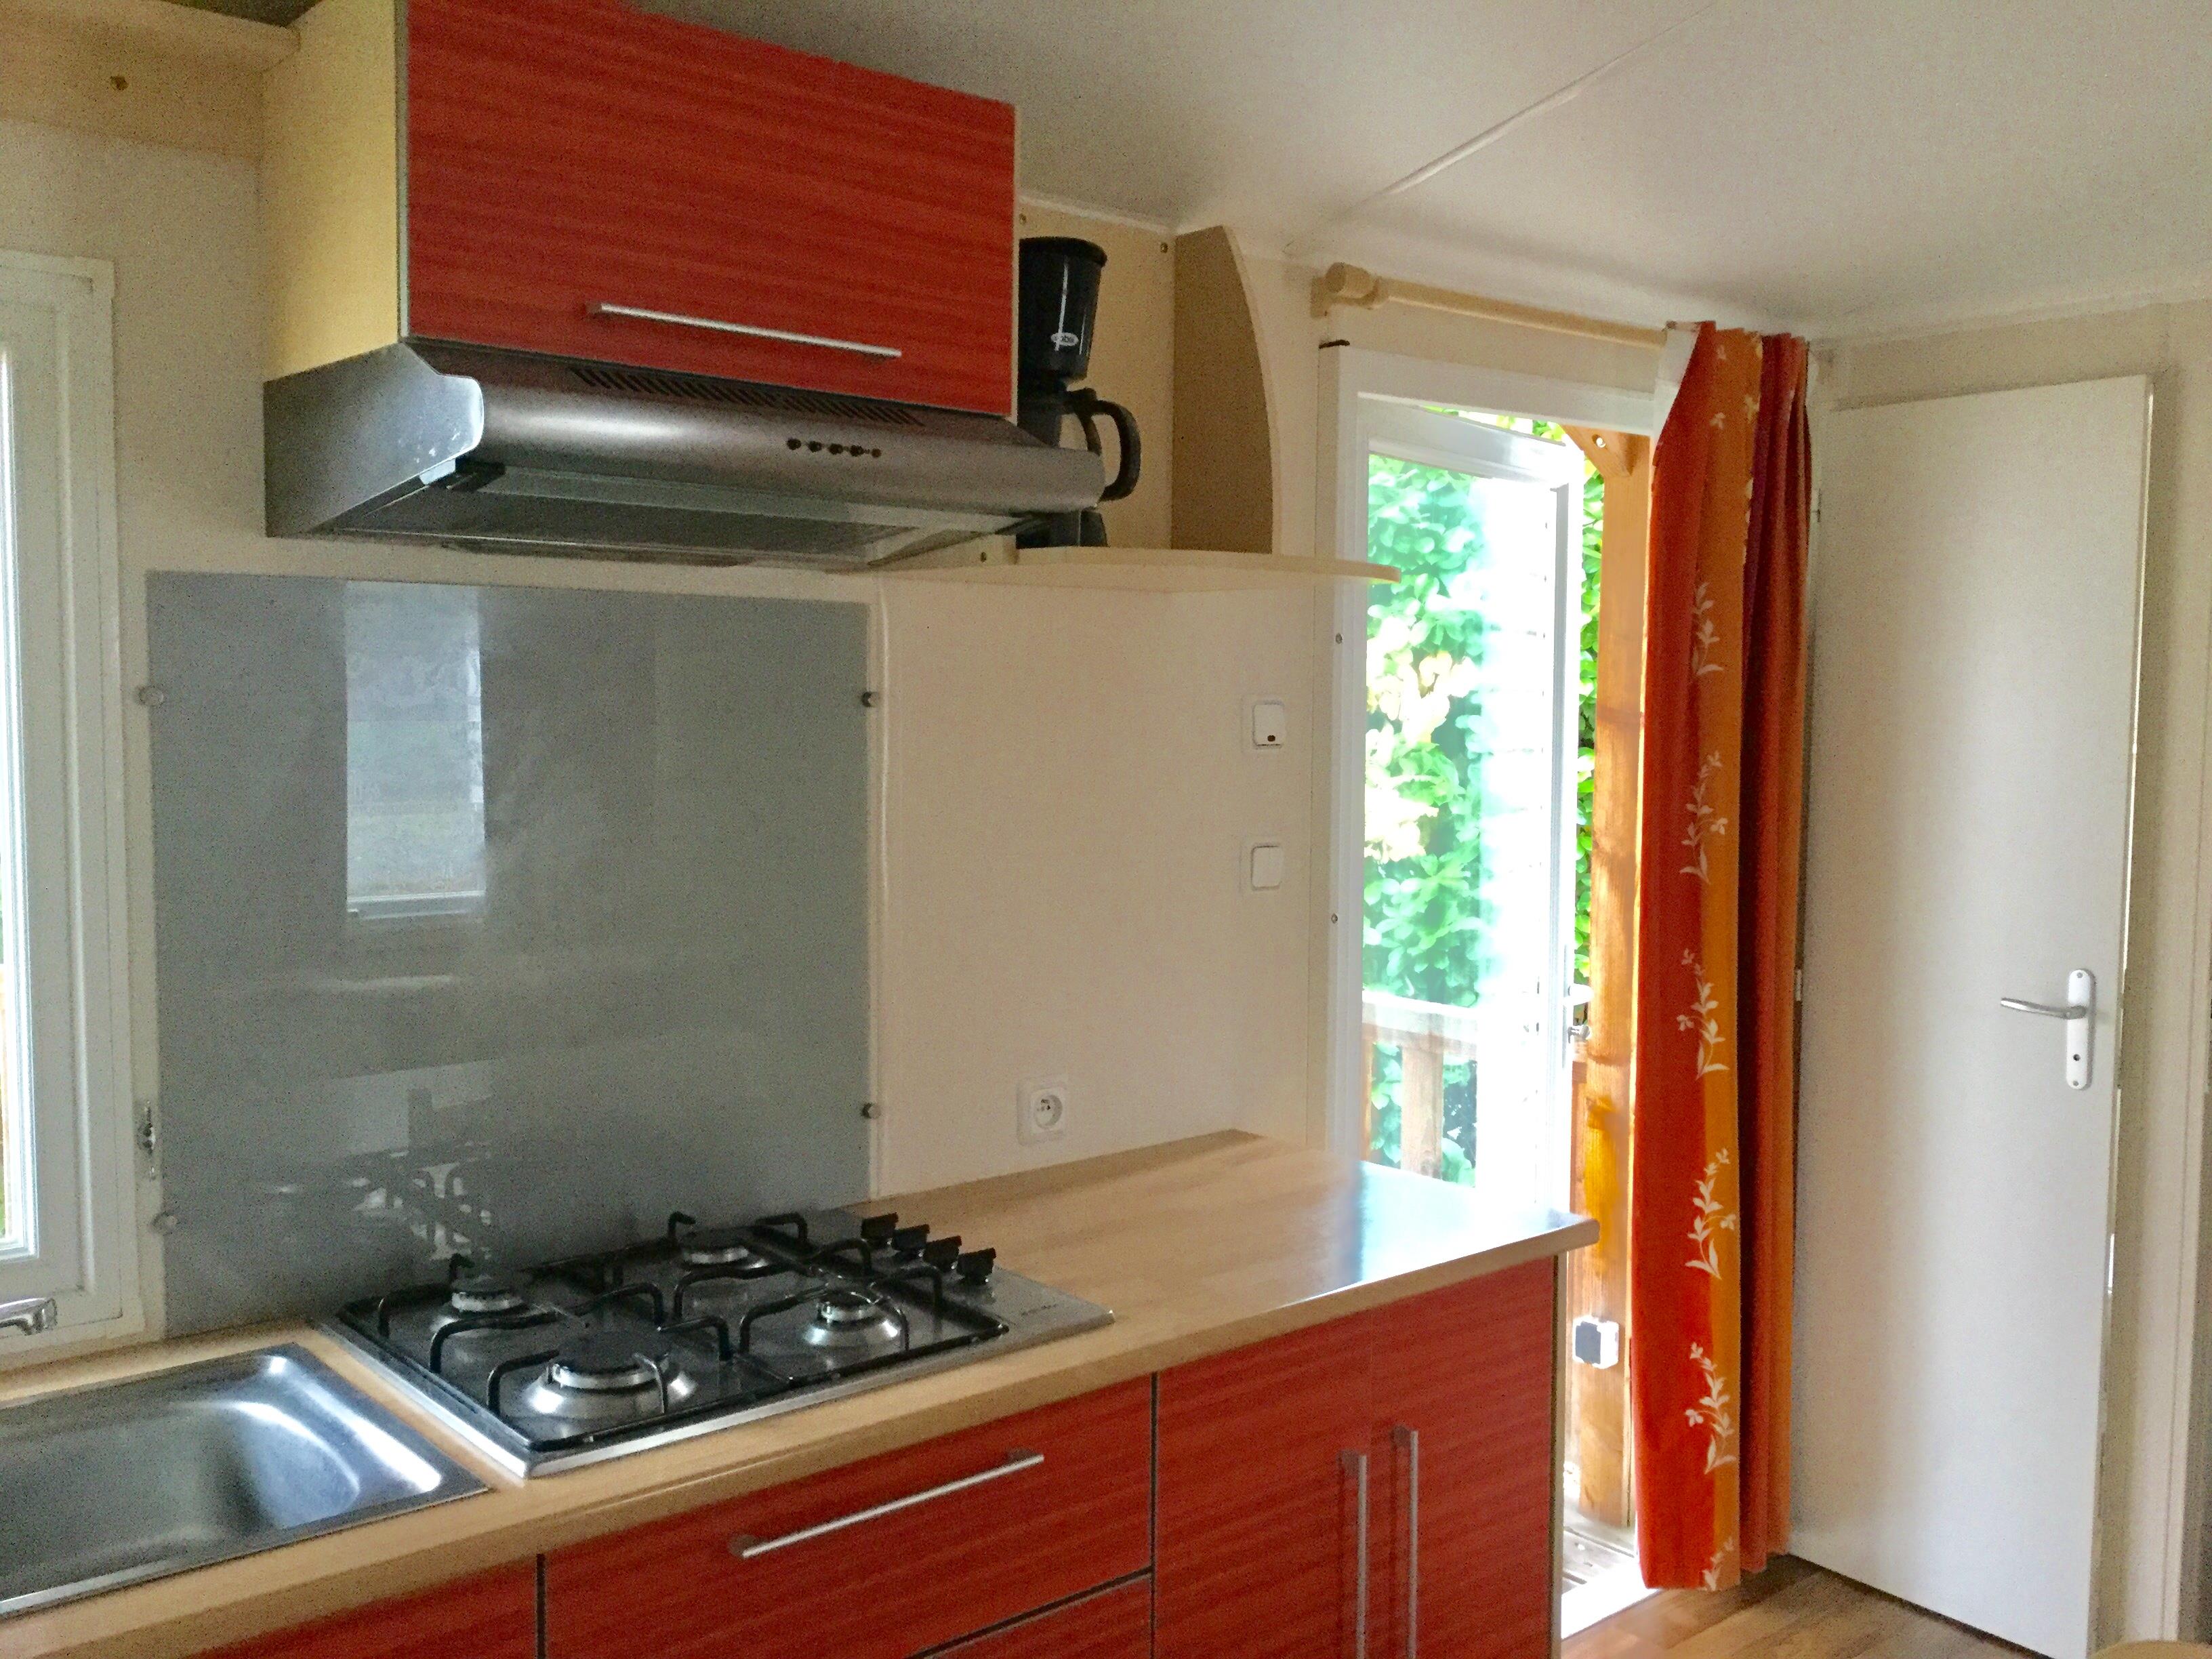 Location - Bungalow 2 Chambres 4 Pers - Camping du Bas Larin